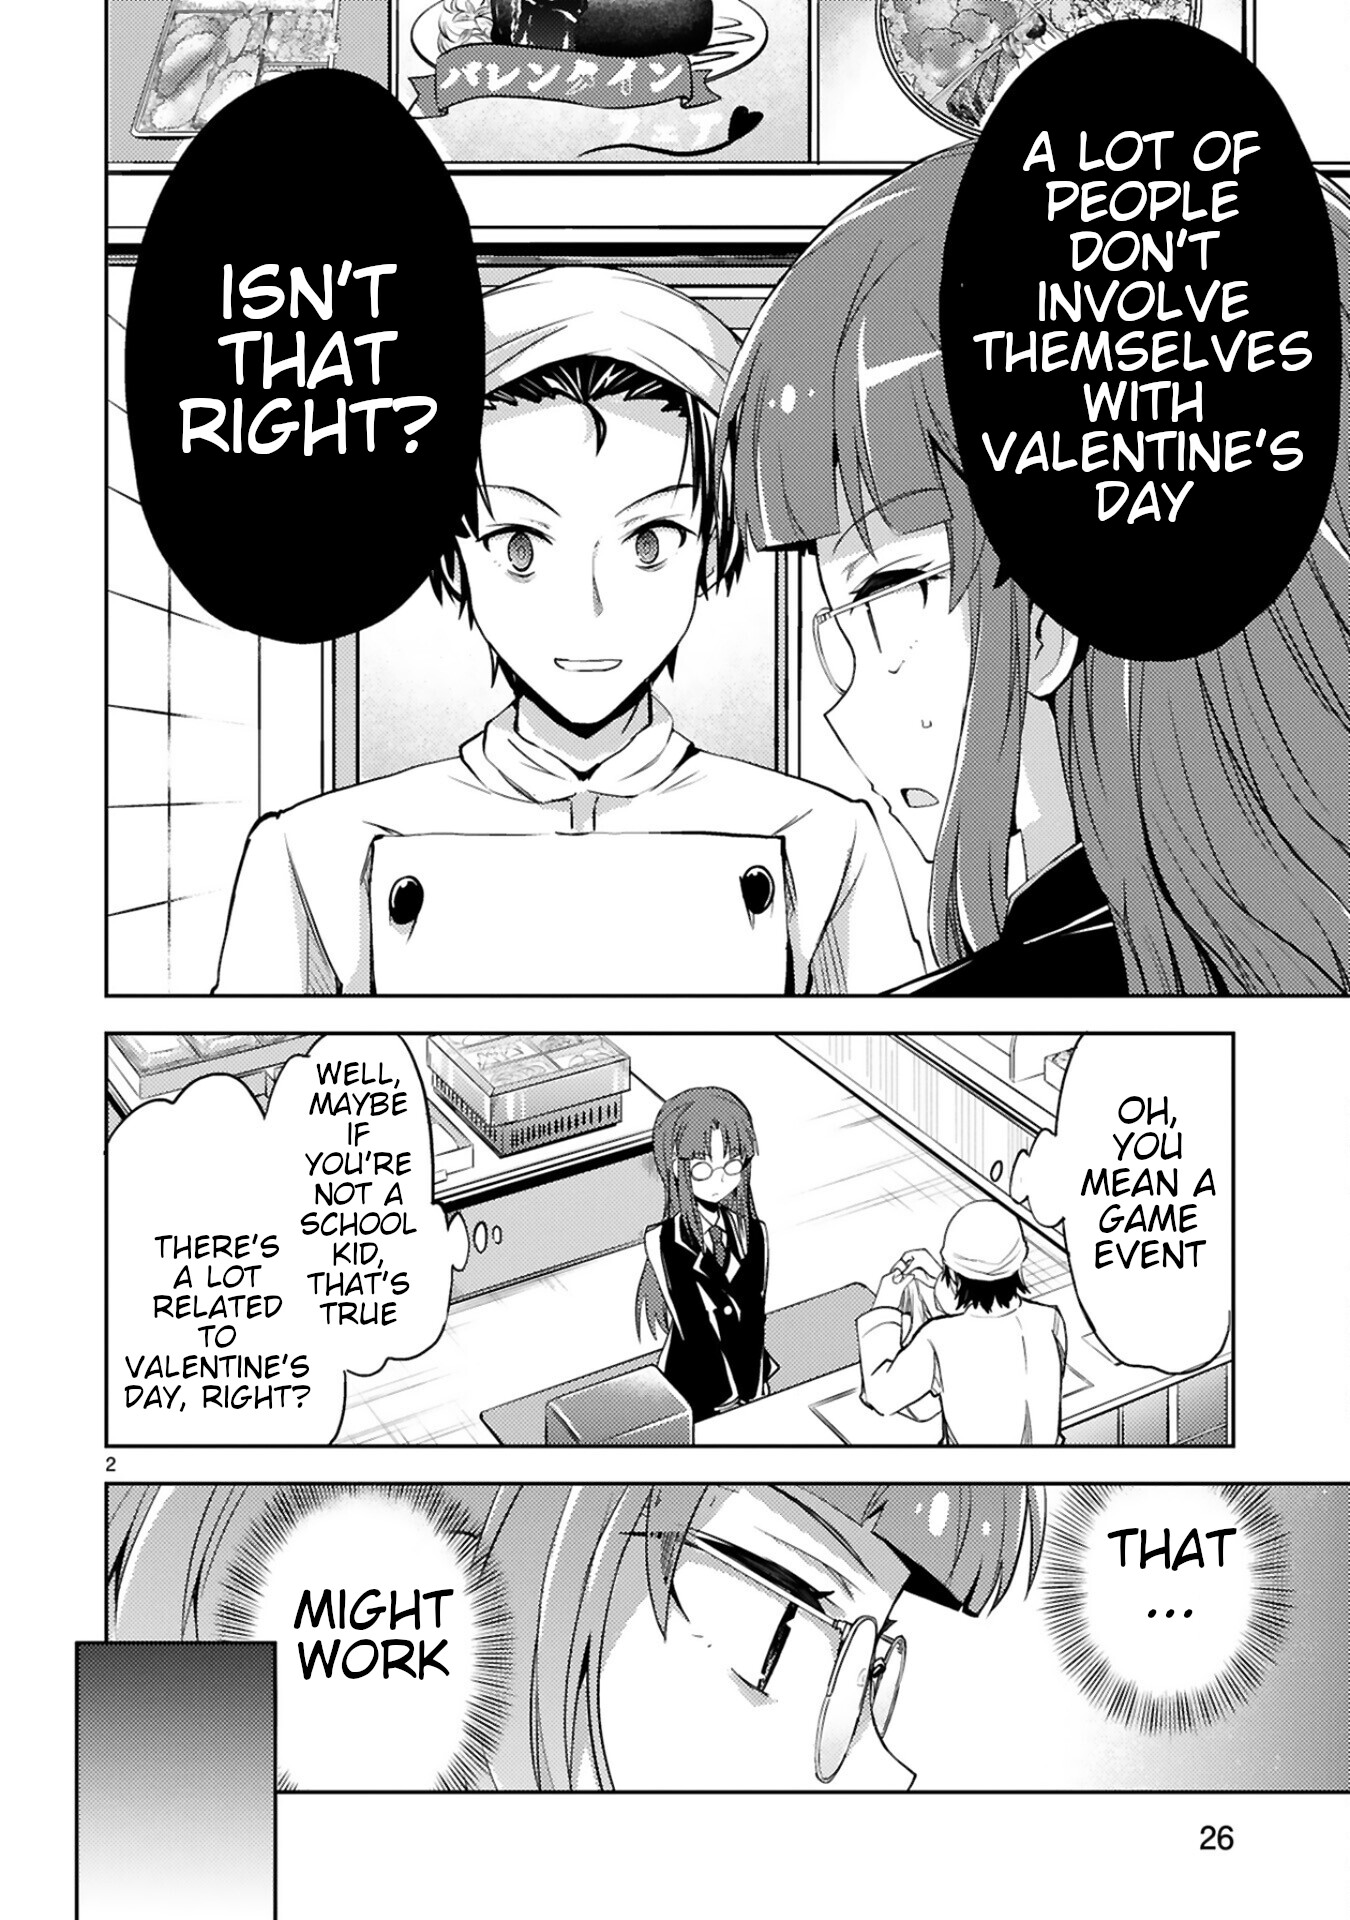 Kuroitsu-San In The Superhuman Research & Development Department Chapter 11: Operation Terrifying Valentine's Day - Picture 2